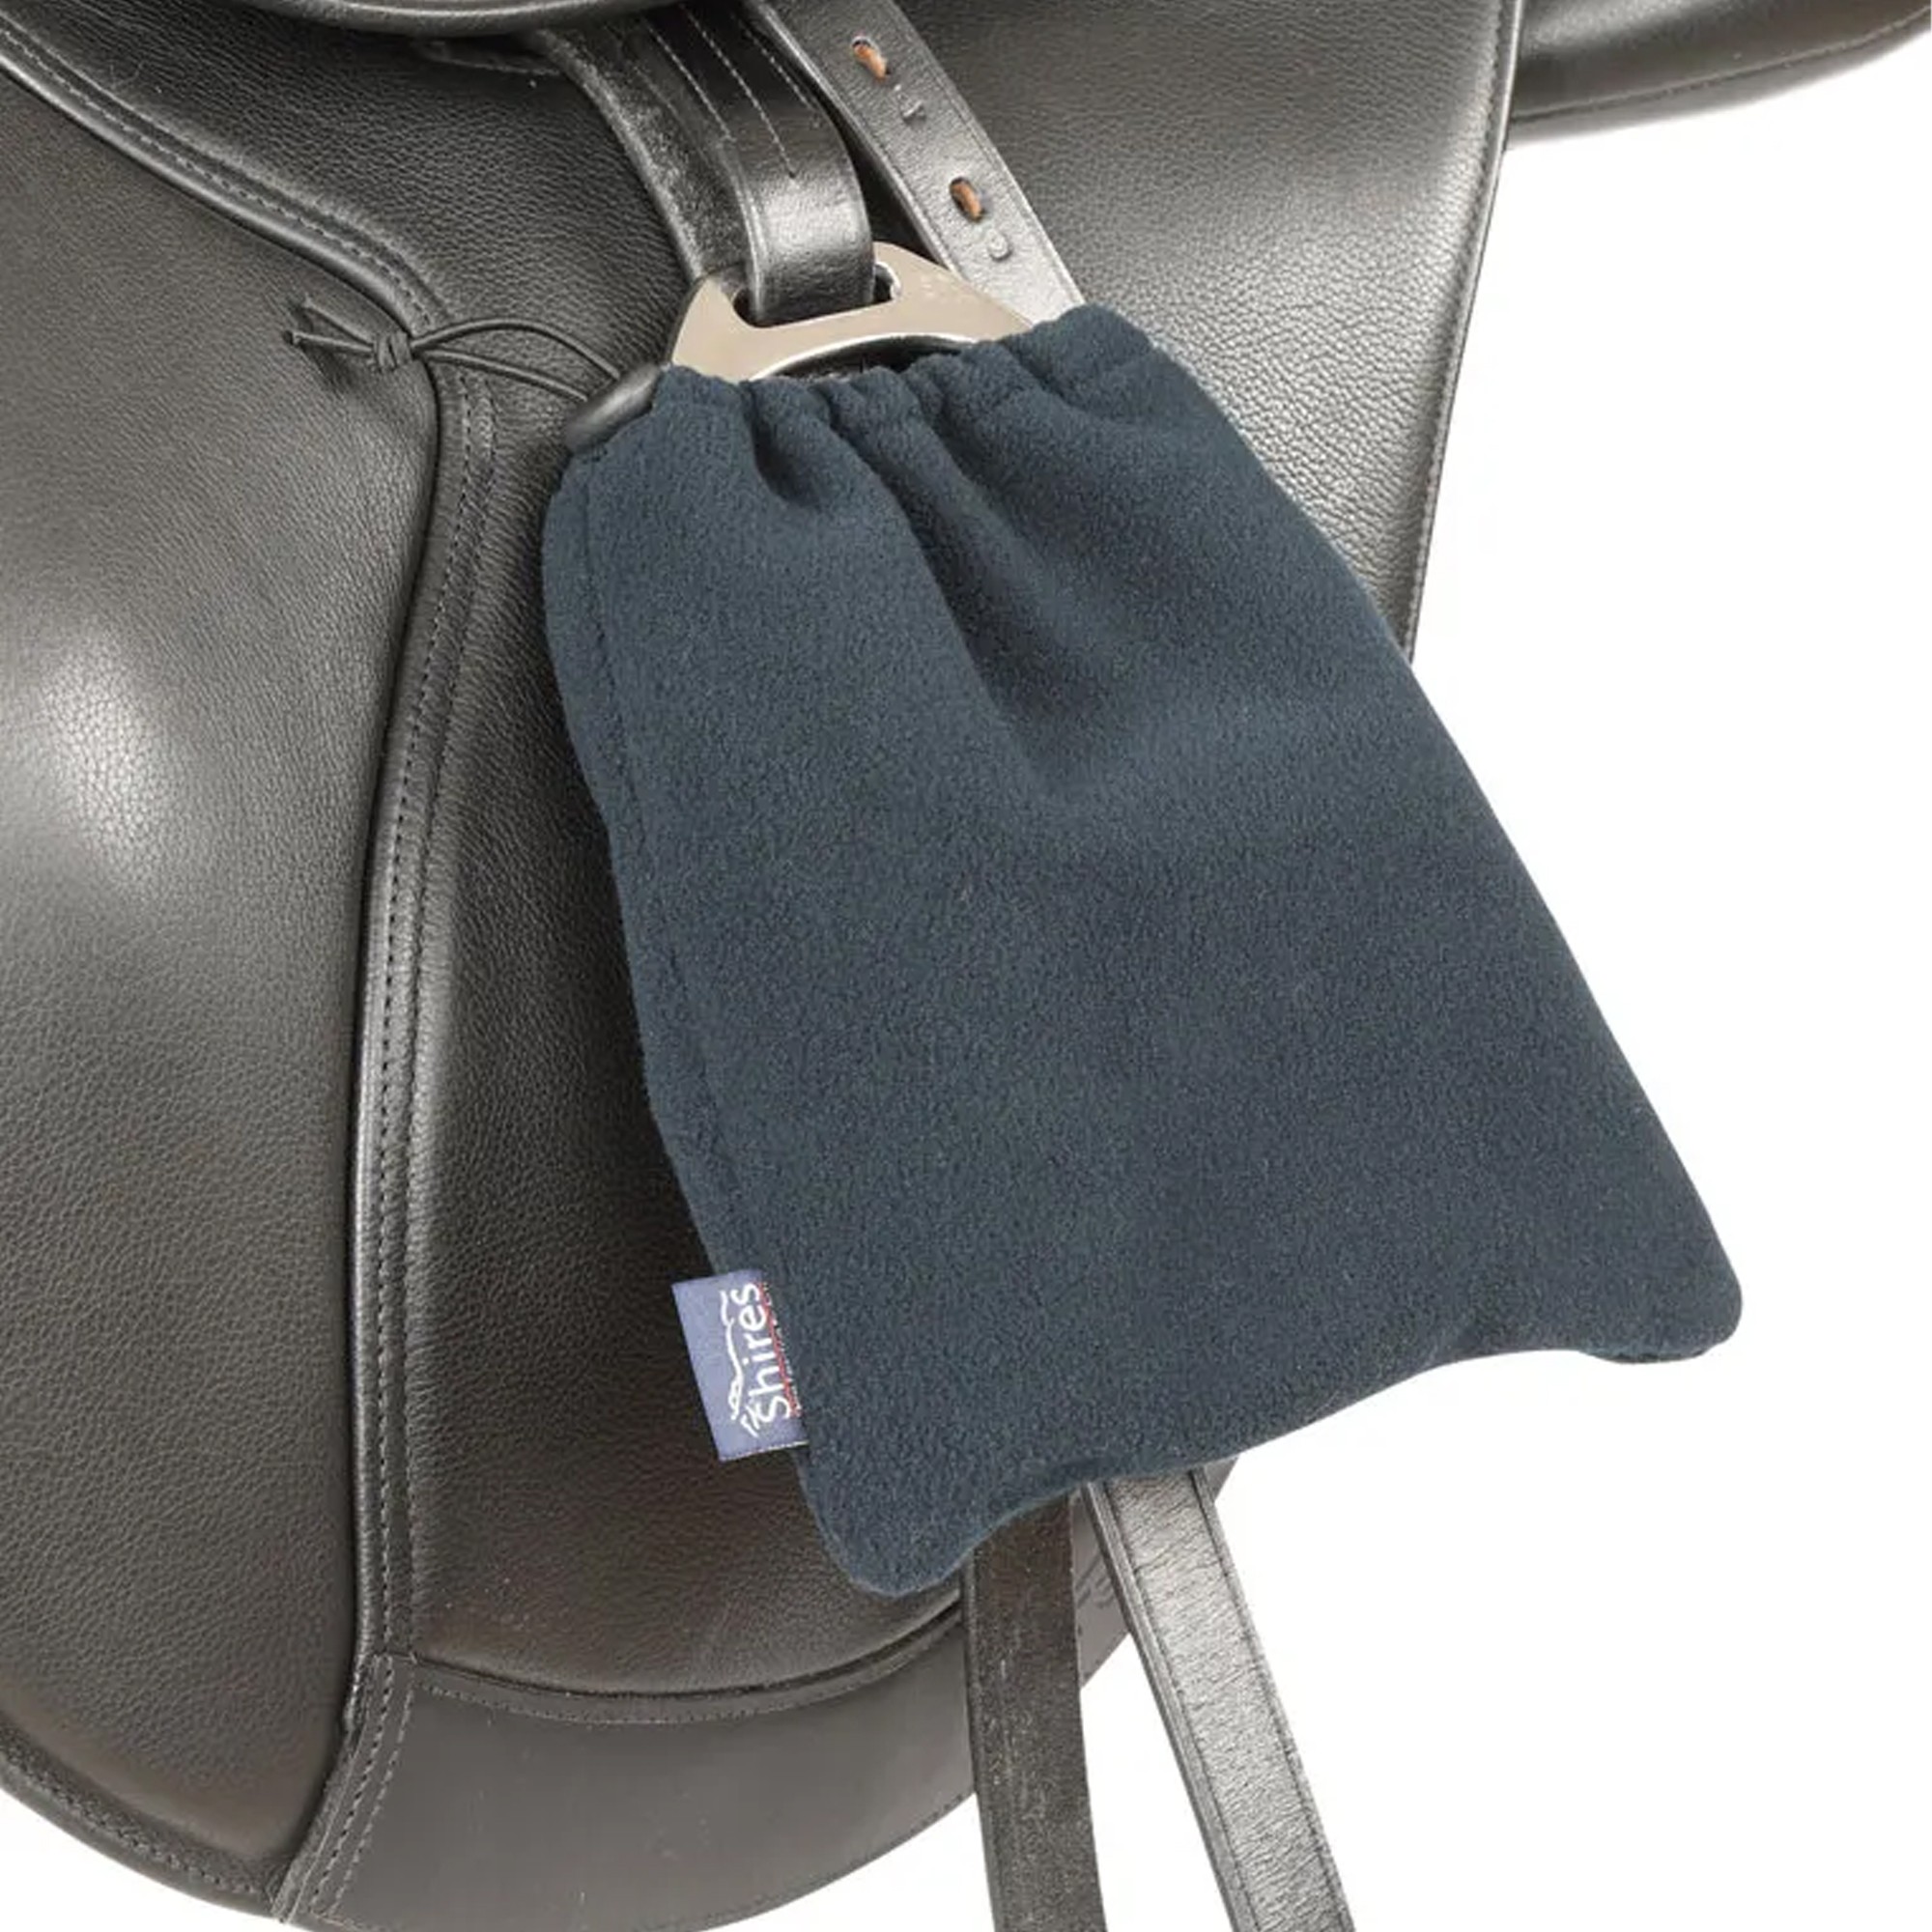 STIRRUP IRON COVERSShires Fleece Stirrup Covers BLACK Protect for saddle 